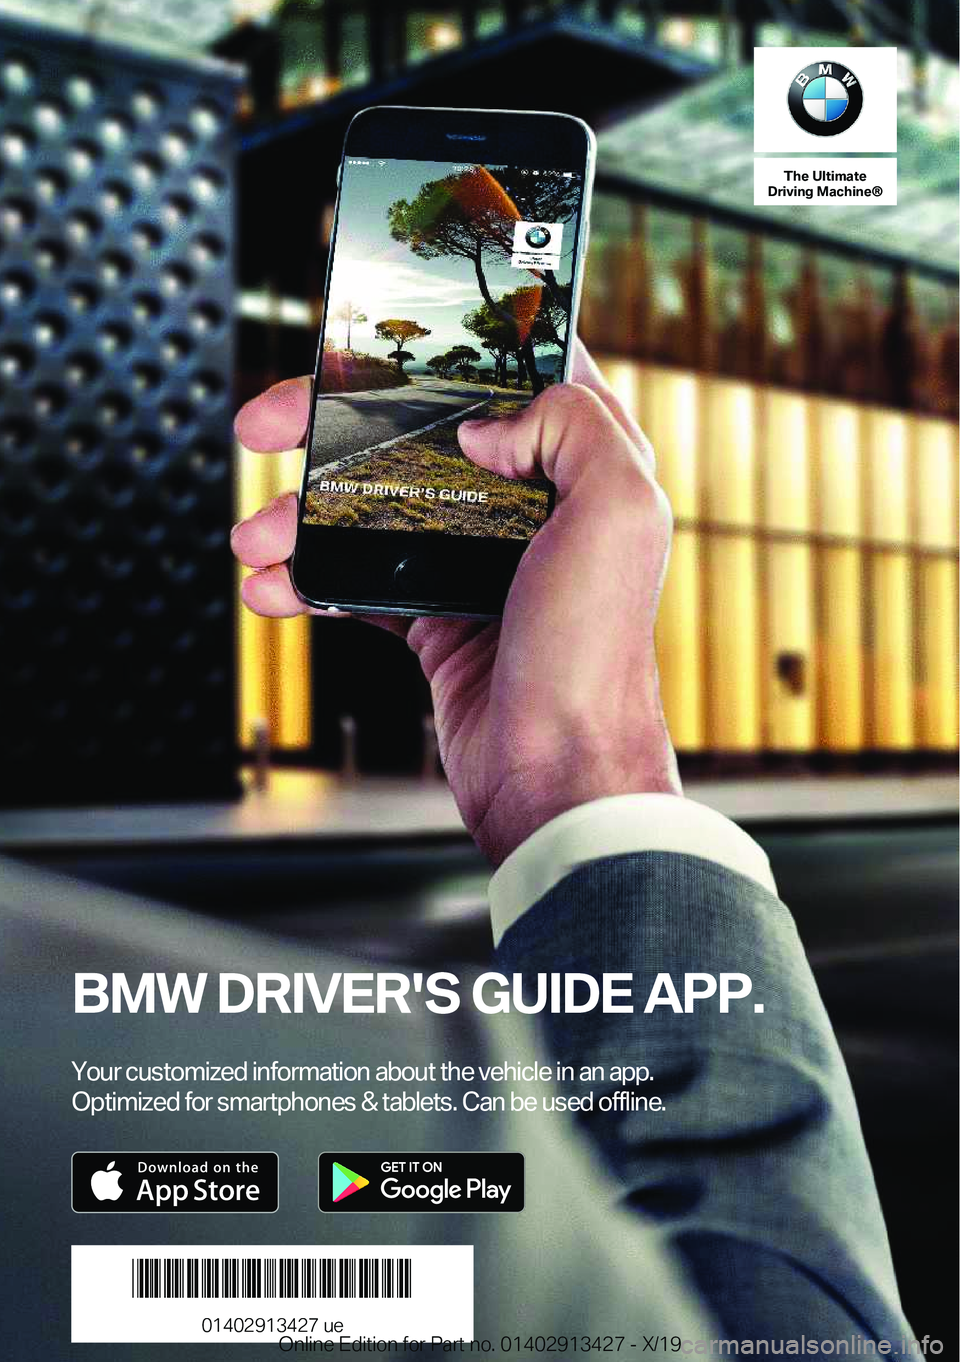 BMW 3 SERIES 2020  Owners Manual �T�h�e��U�l�t�i�m�a�t�e
�D�r�i�v�i�n�g��M�a�c�h�i�n�e�n
�B�M�W��D�R�I�V�E�R�'�S��G�U�I�D�E��A�P�P�.
�Y�o�u�r��c�u�s�t�o�m�i�z�e�d��i�n�f�o�r�m�a�t�i�o�n��a�b�o�u�t��t�h�e��v�e�h�i�c�l�e�